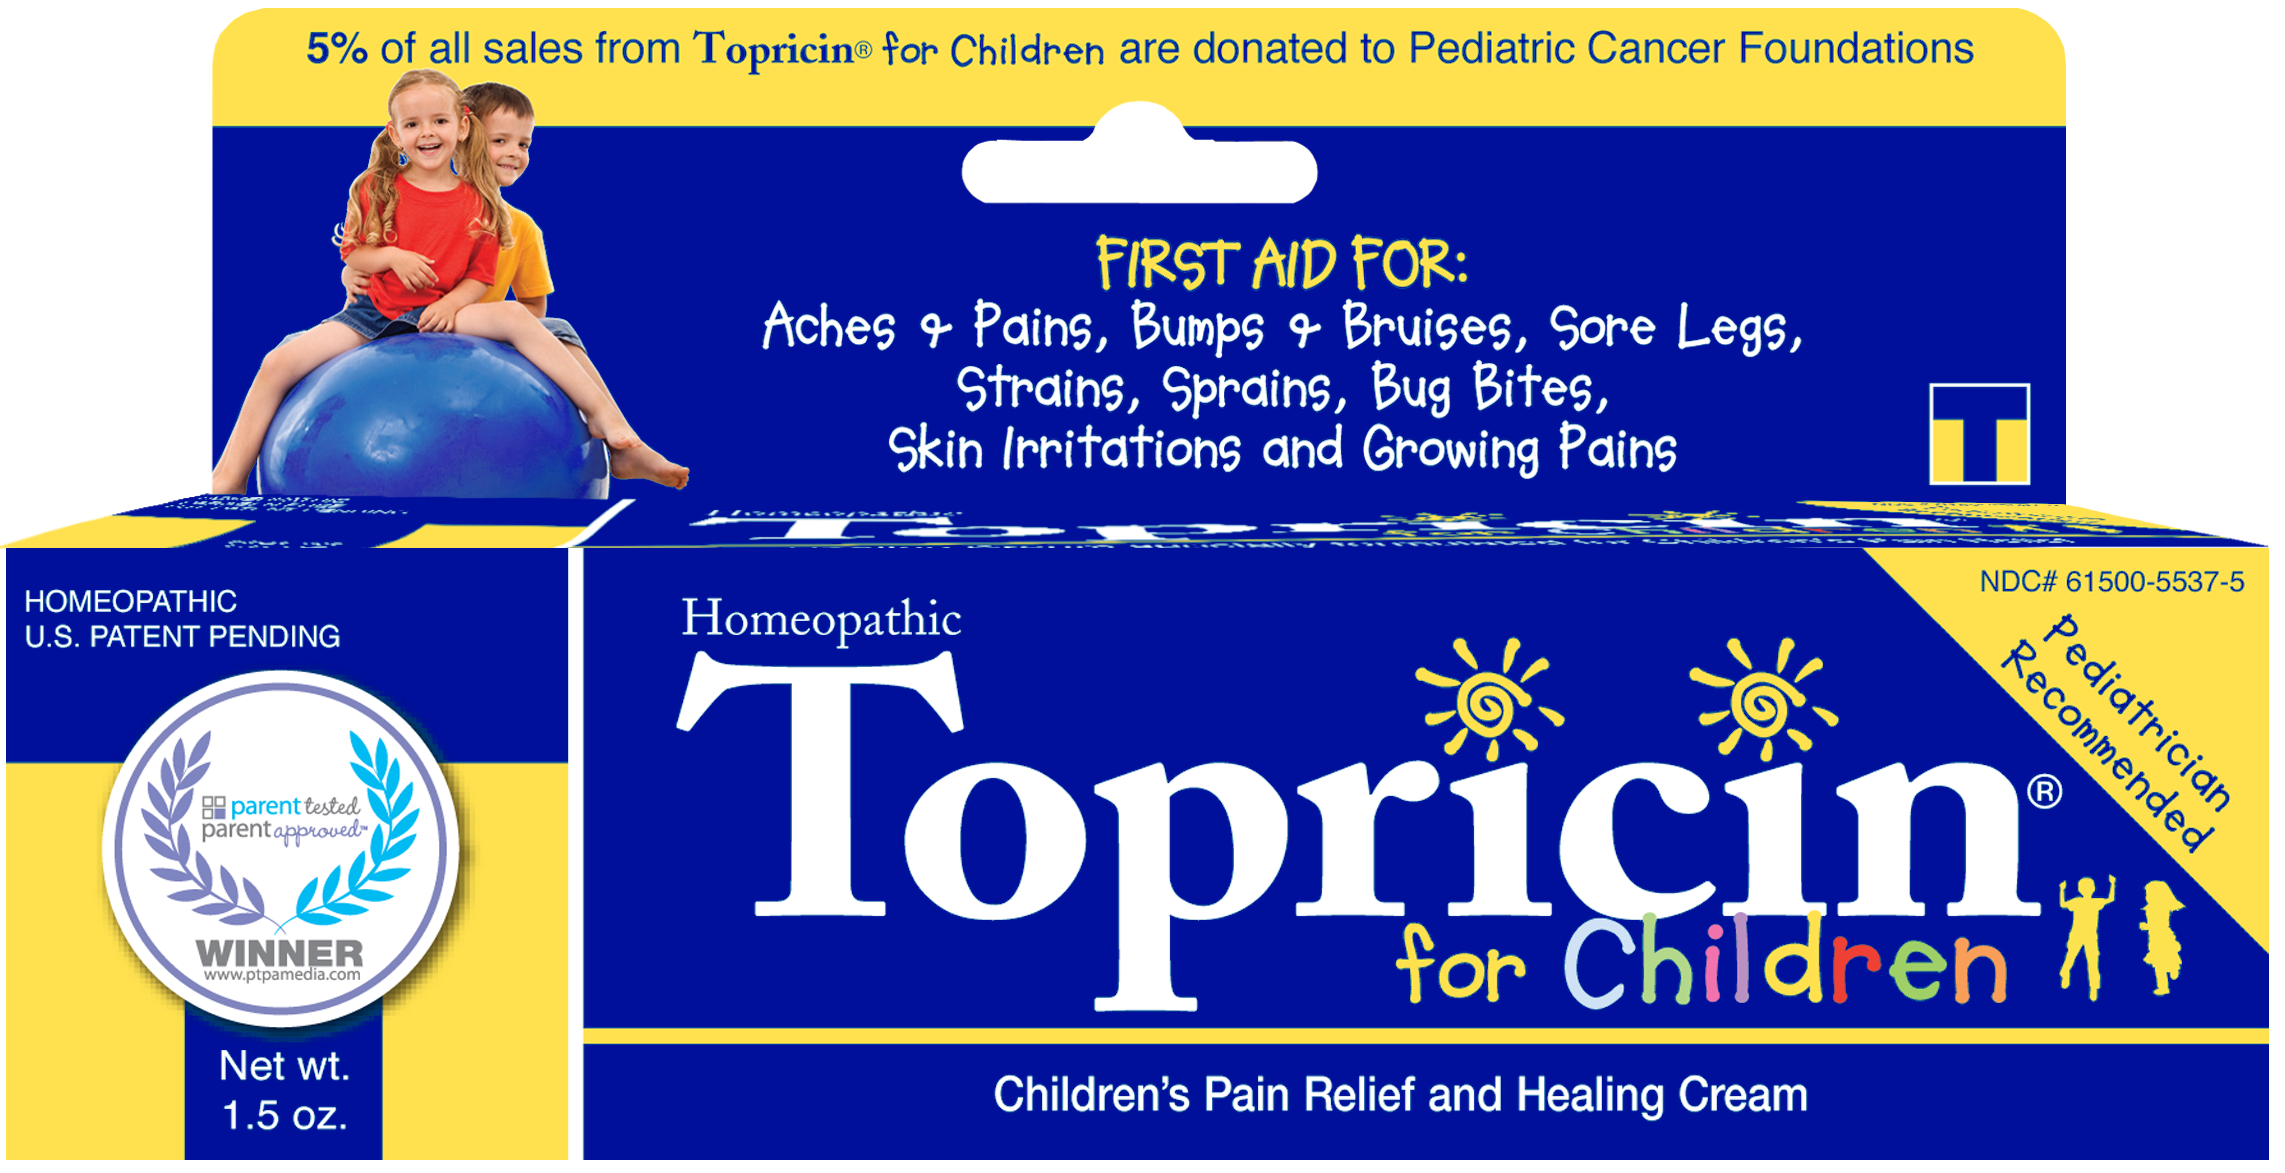 Safe, natural Topricin for Children helps relieves all the aches, pains, and boo boos of the school year